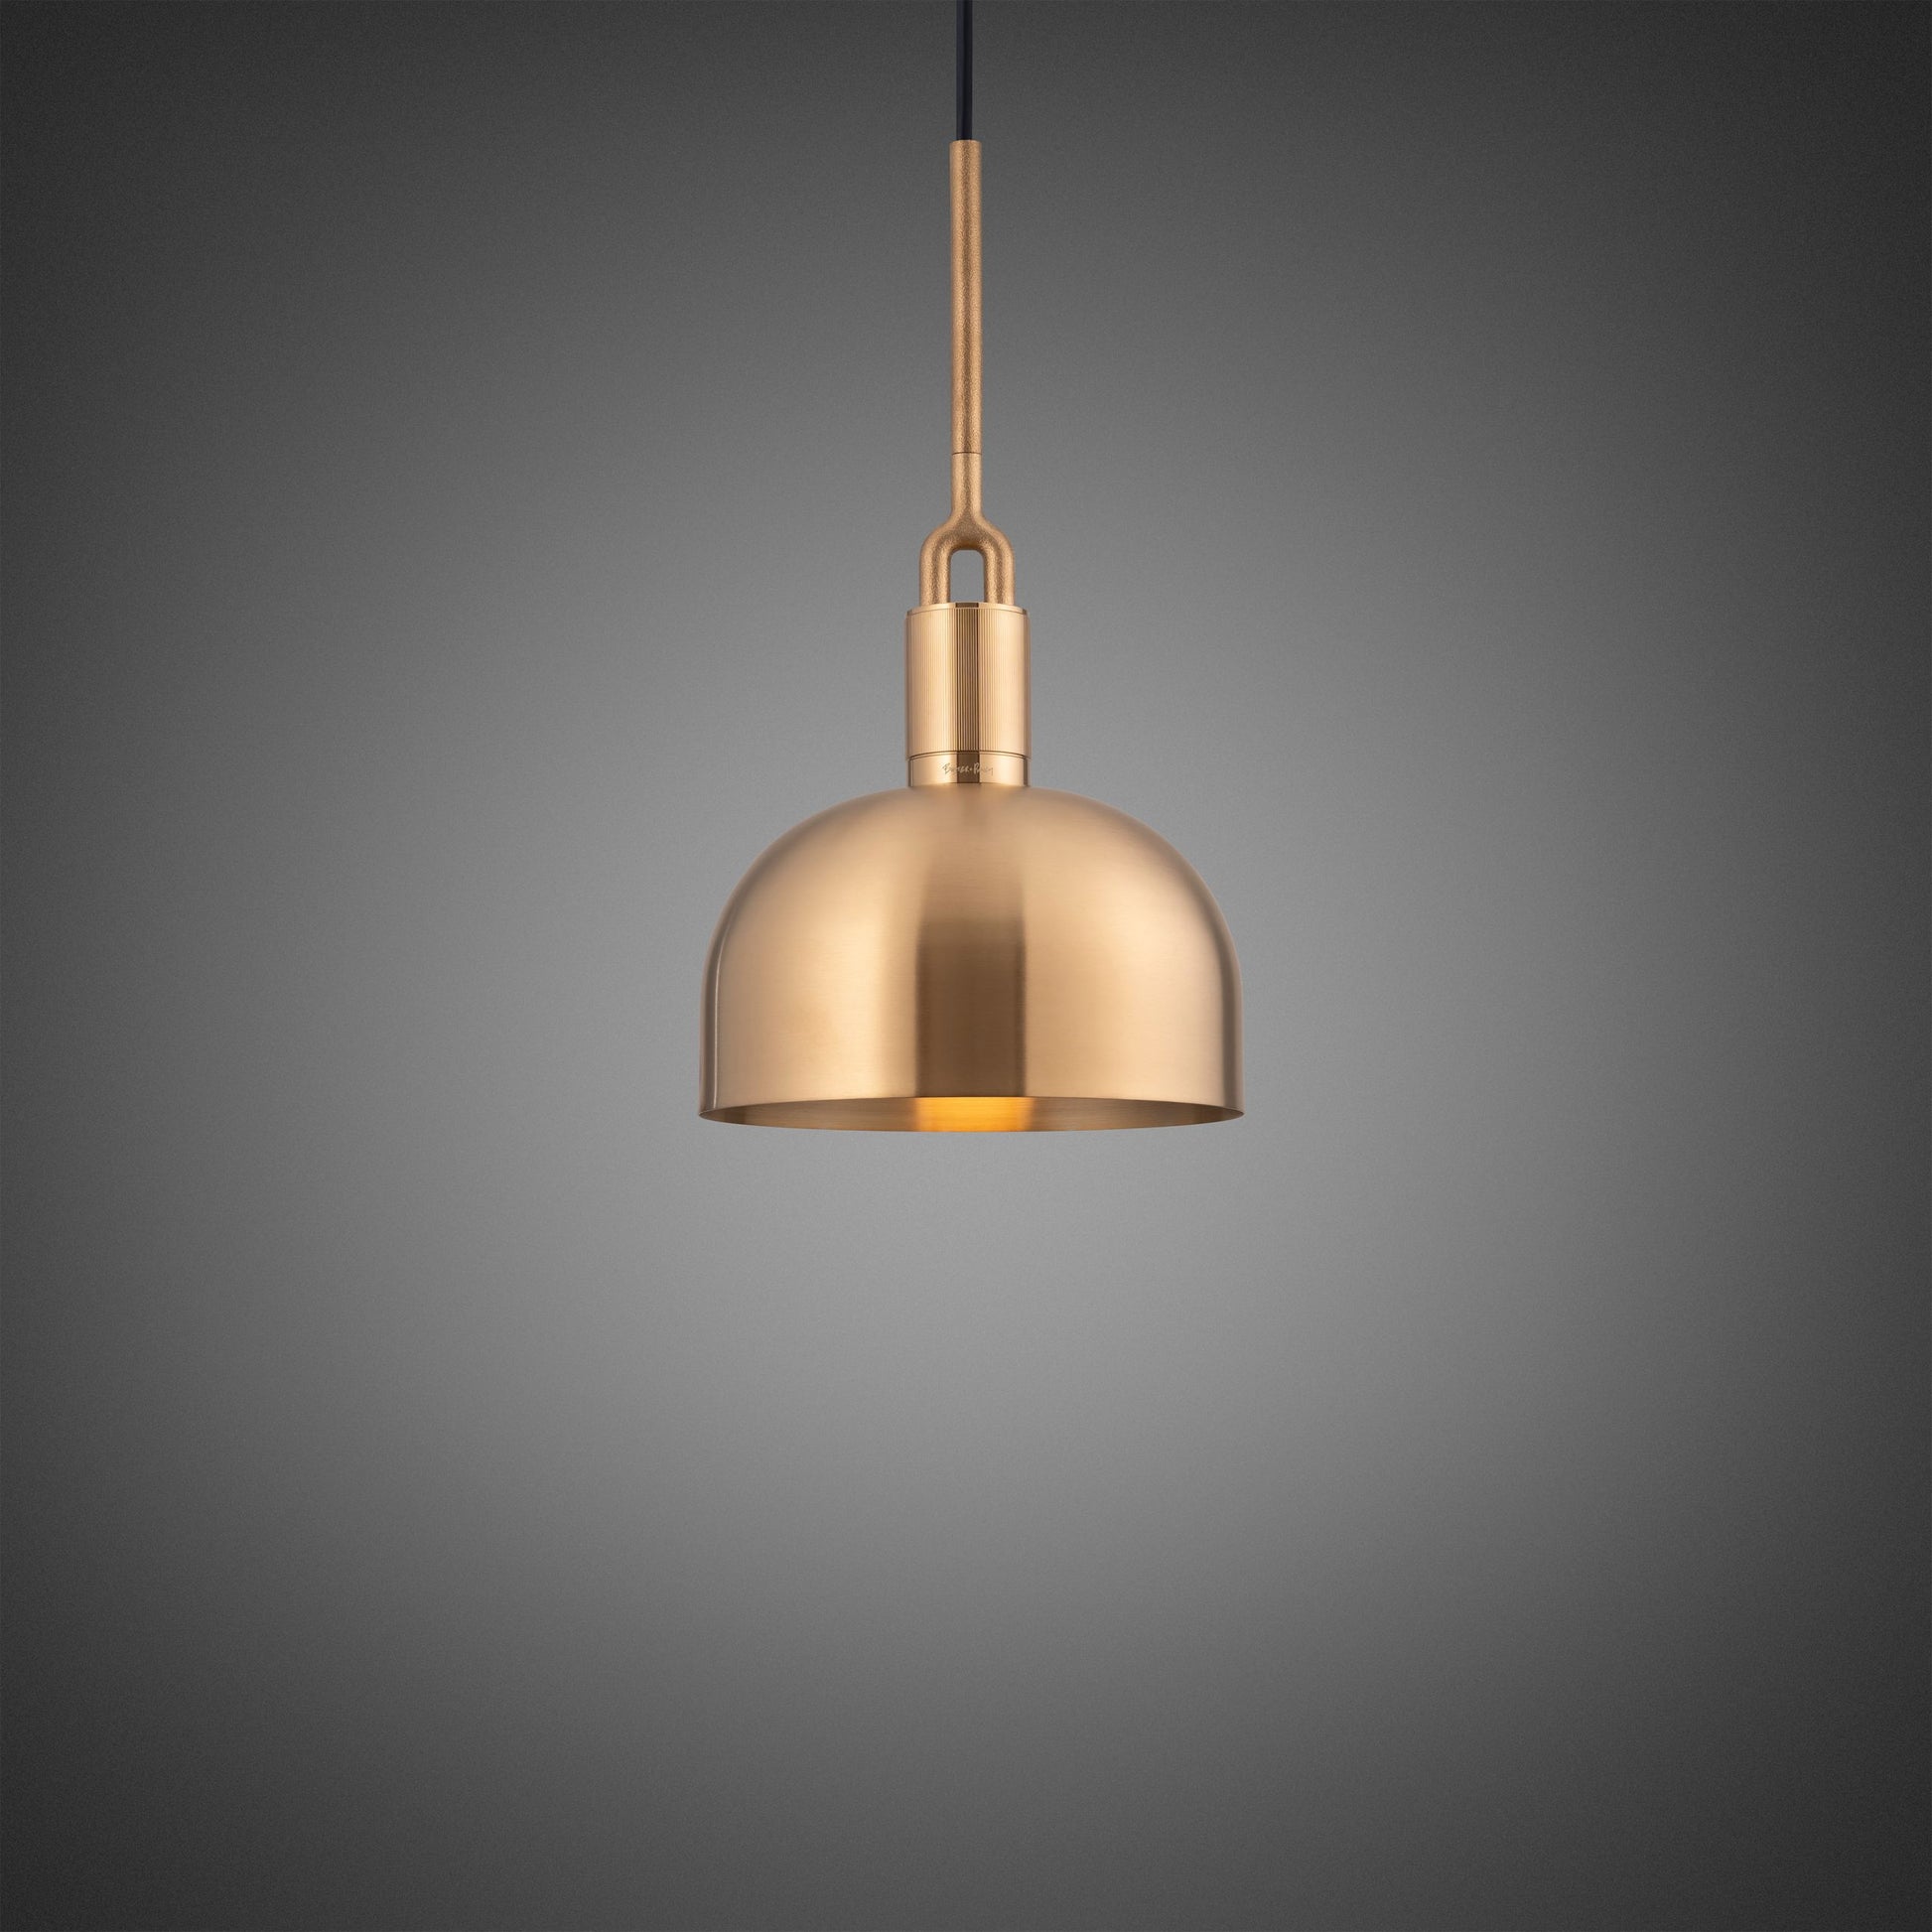 Forked Pendant Light / Shade / Medium brass, front view.